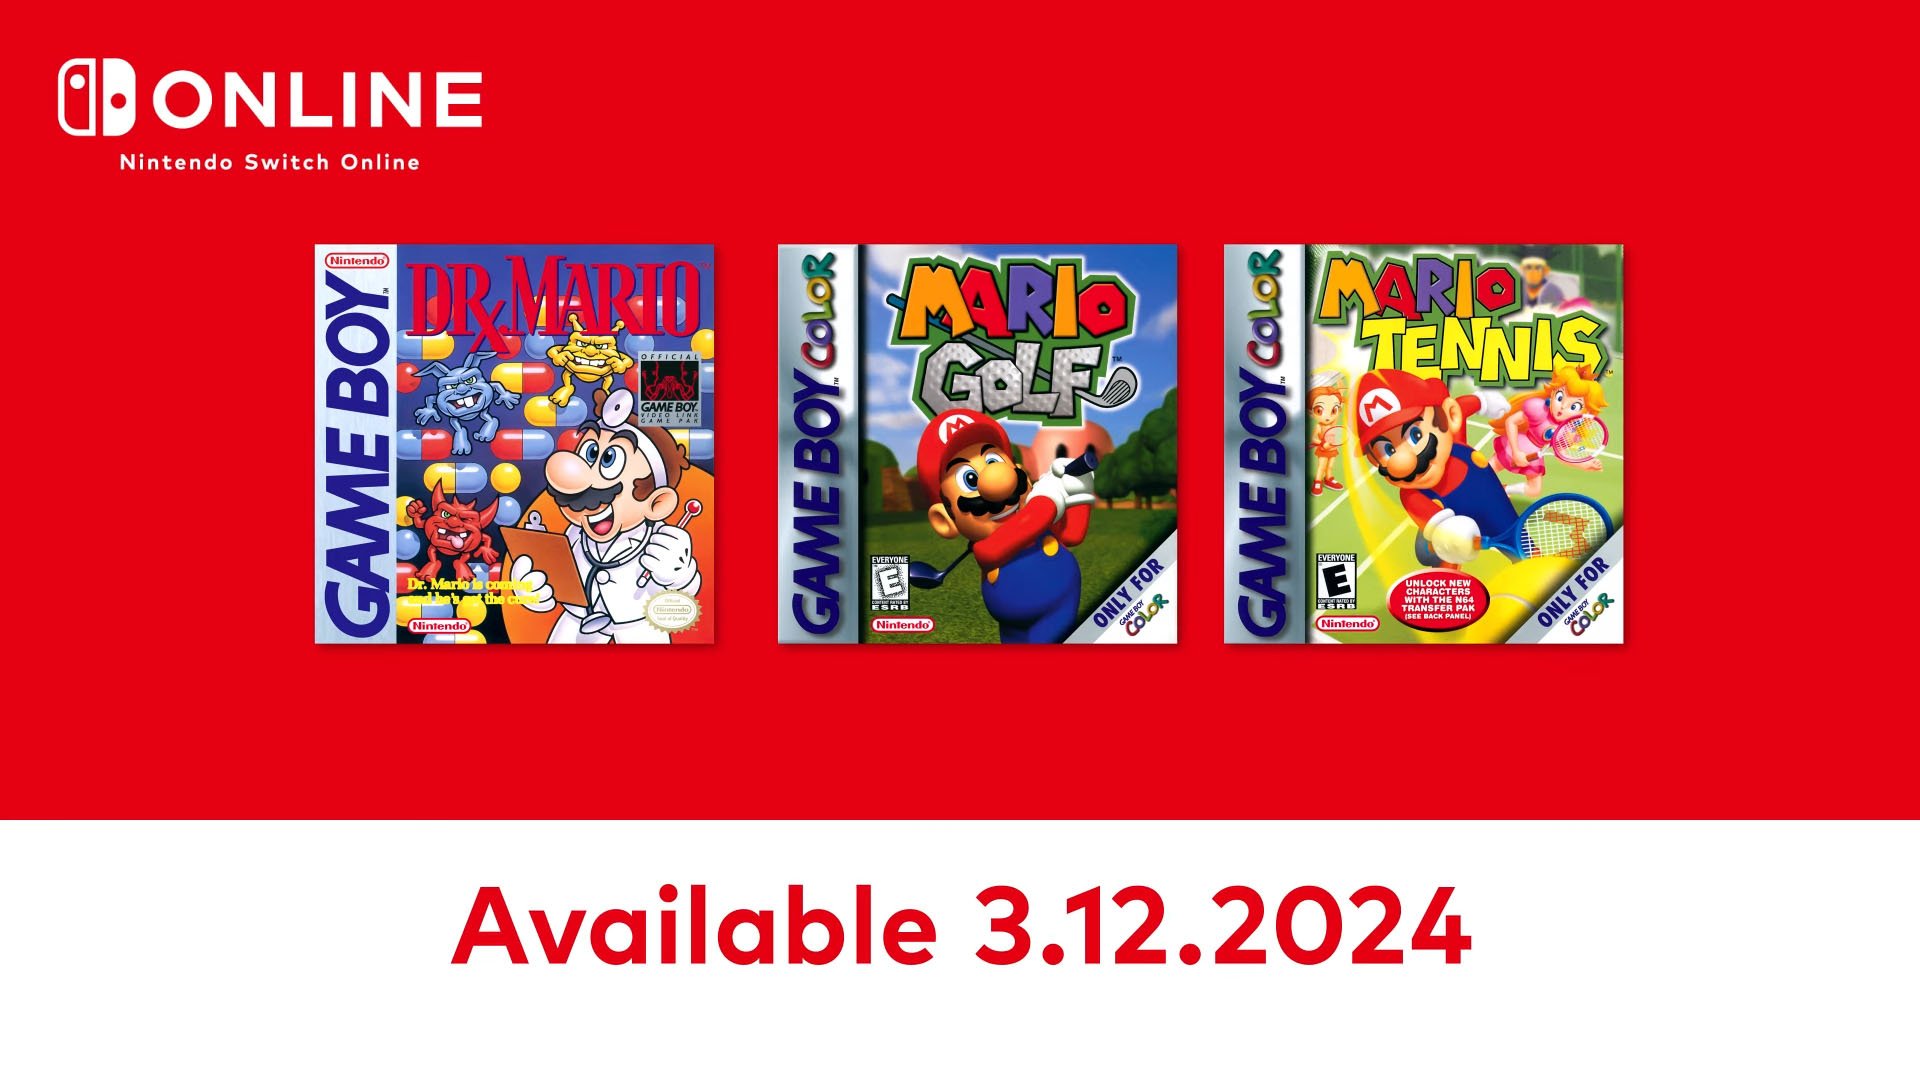 #
      Game Boy – Nintendo Switch Online adds Dr. Mario, Mario Golf, and Mario Tennis on March 12